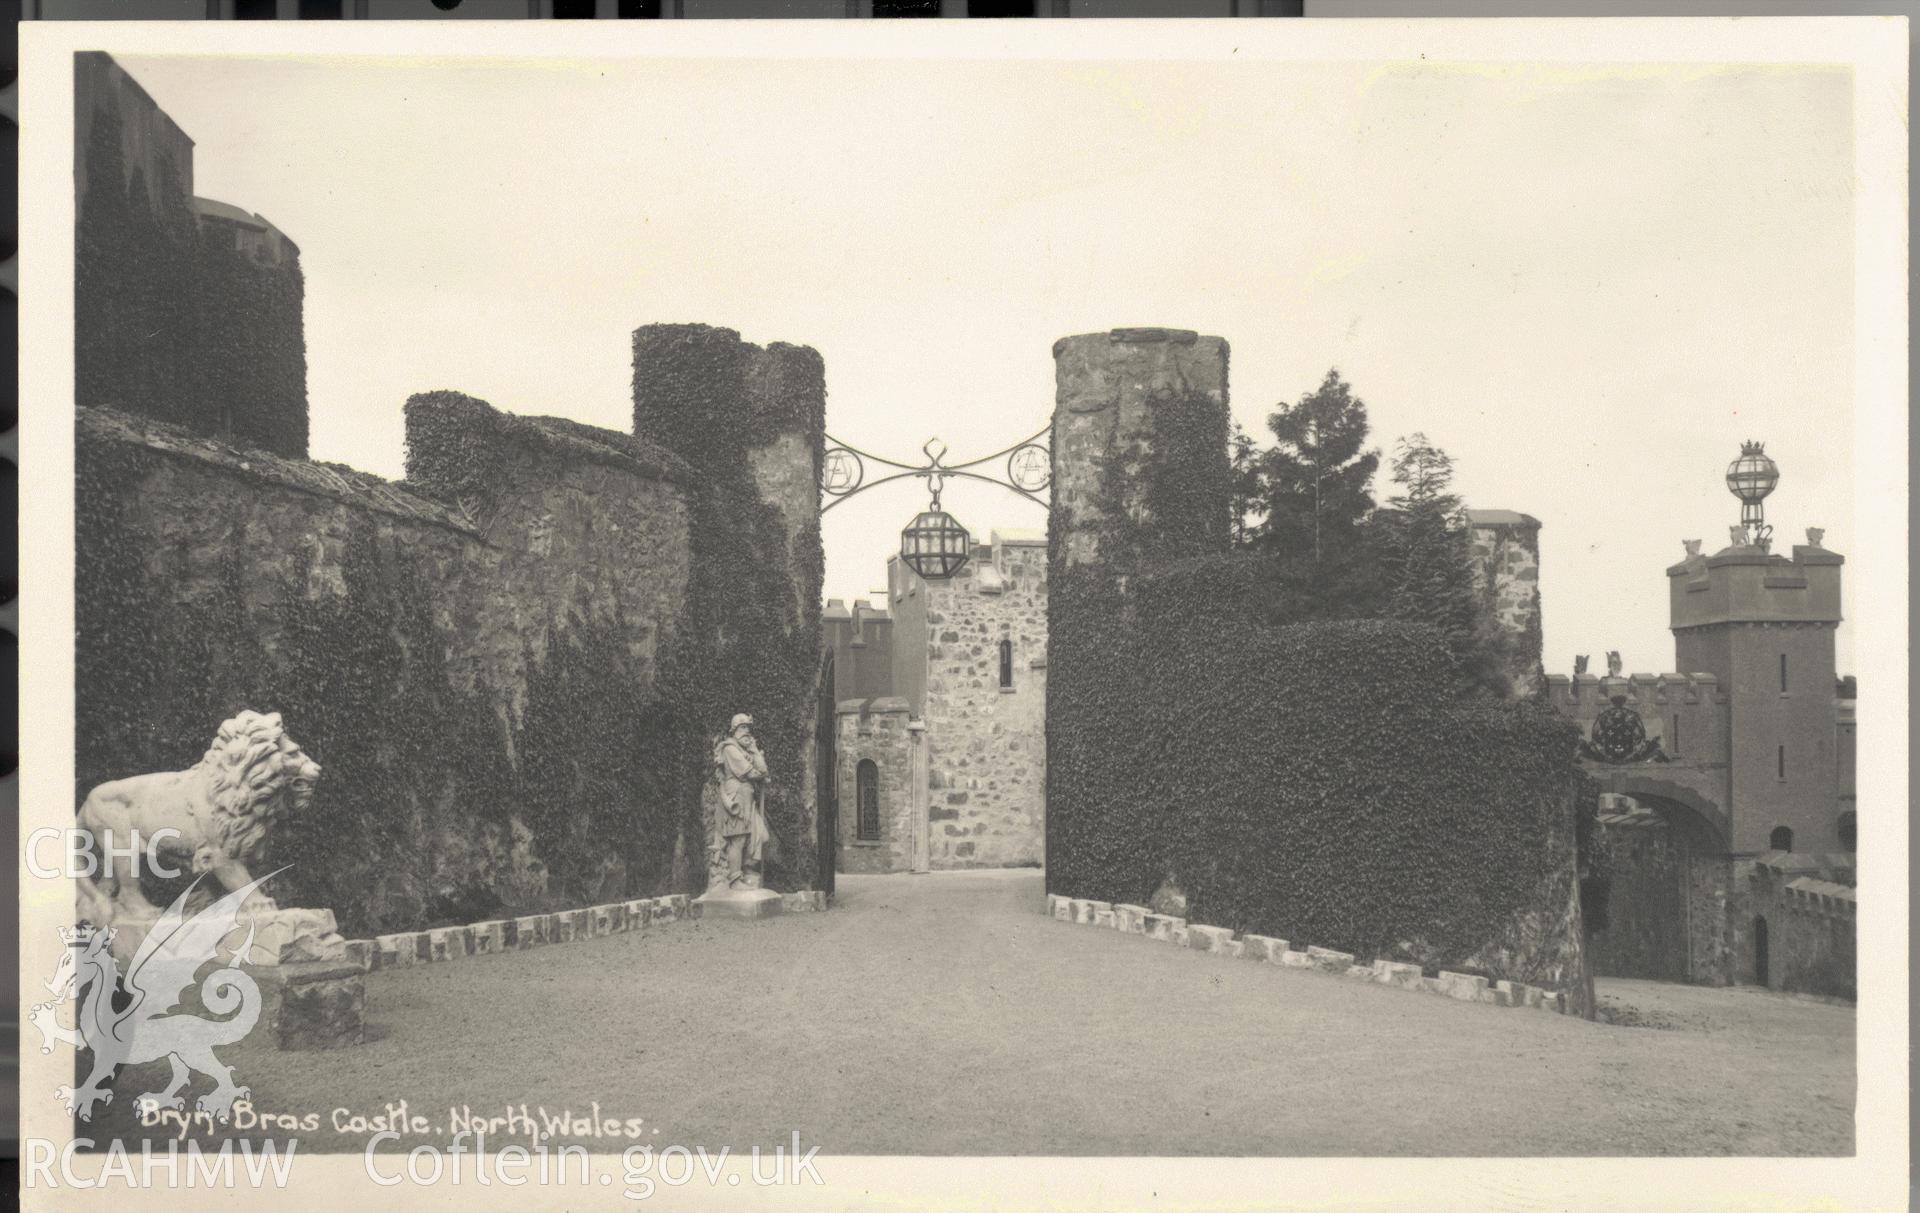 Digitised postcard image of Bryn Bras Castle, Llanrug, , showing statuary. Produced by Parks and Gardens Data Services, from an original item in the Peter Davis Collection at Parks and Gardens UK. We hold only web-resolution images of this collection, suitable for viewing on screen and for research purposes only. We do not hold the original images, or publication quality scans.